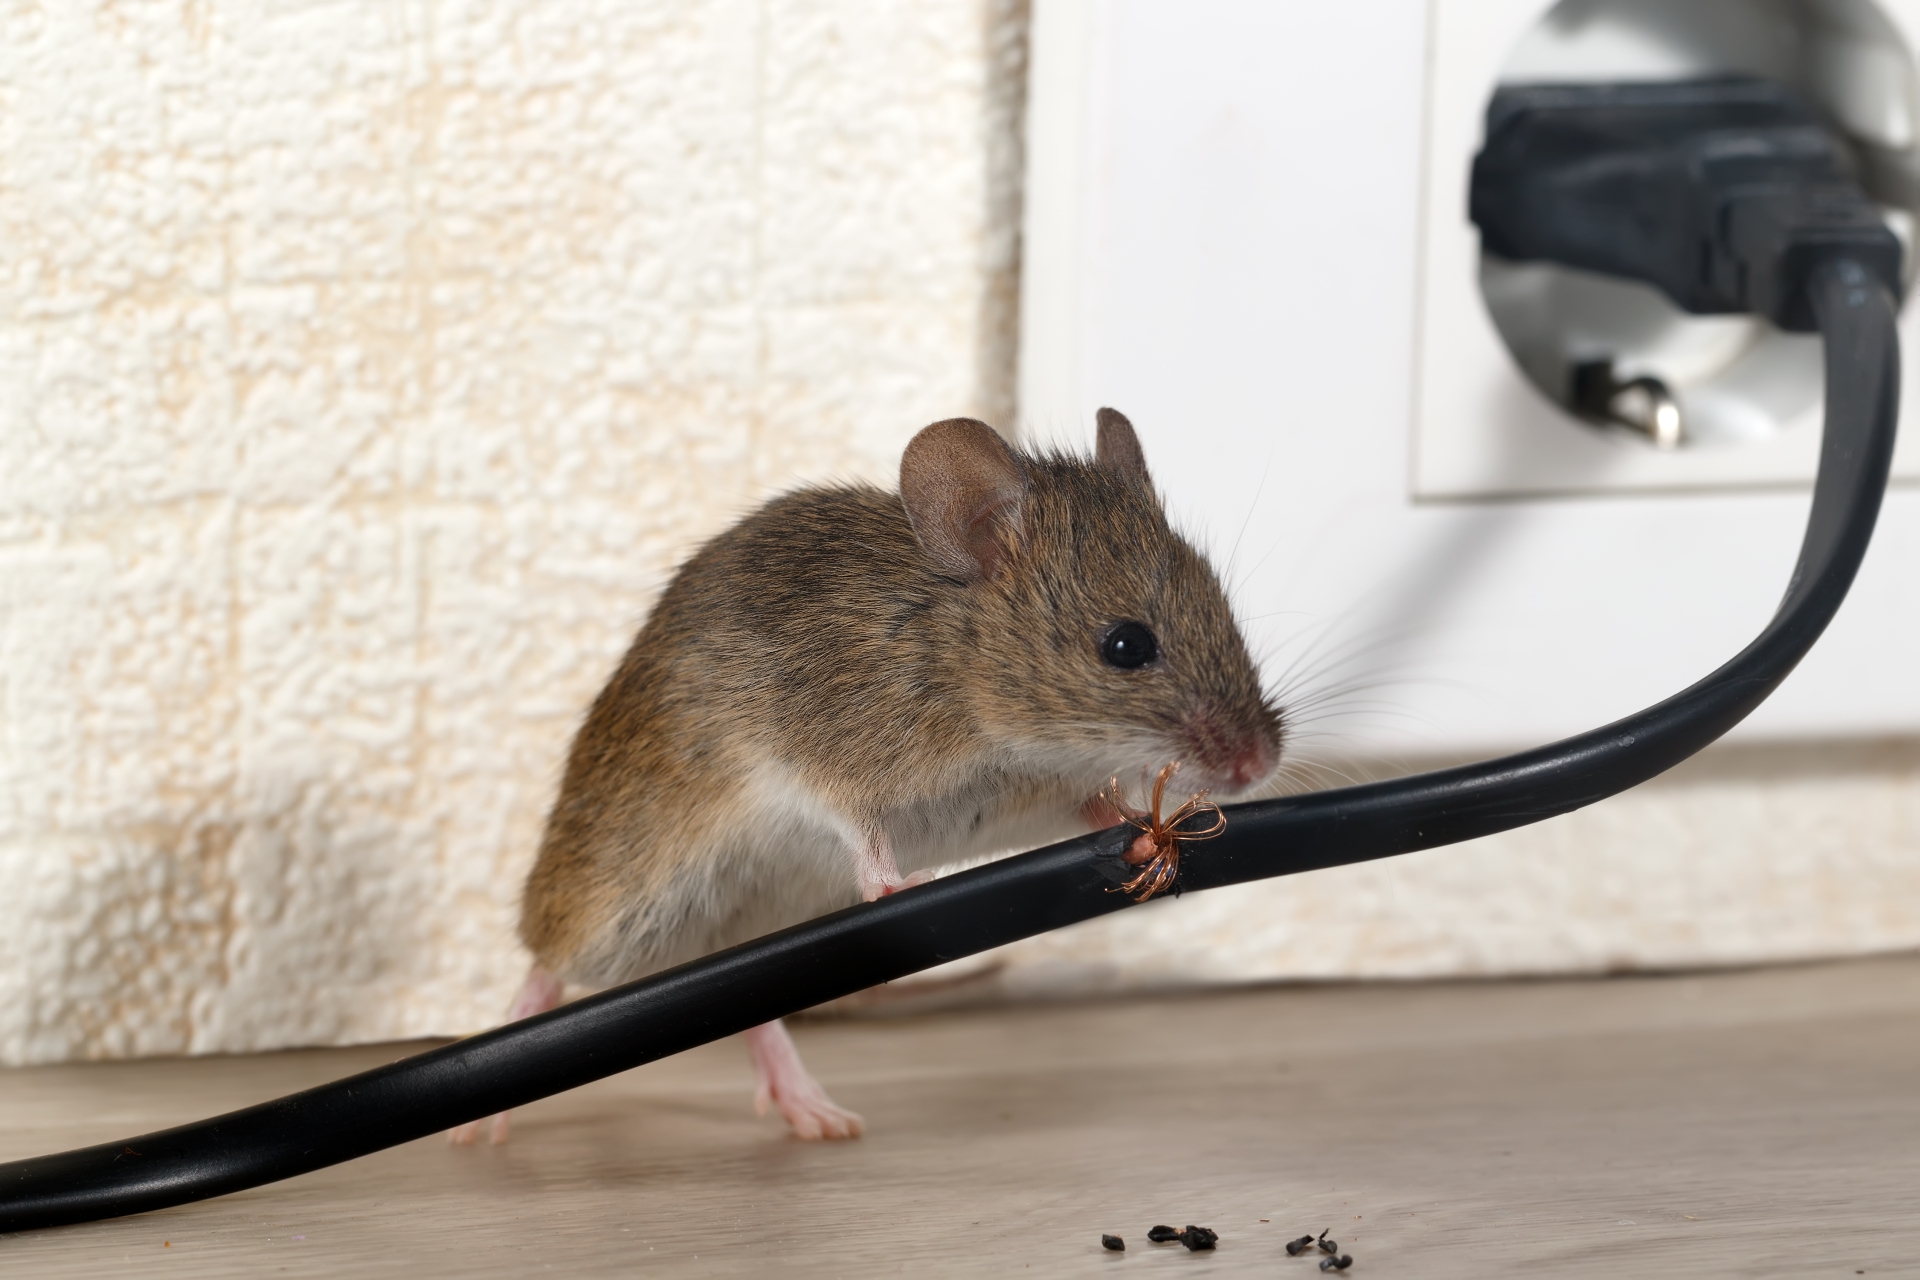 Mice Infestation, Pest Control in Purley, Kenley, CR8. Call Now 020 8166 9746